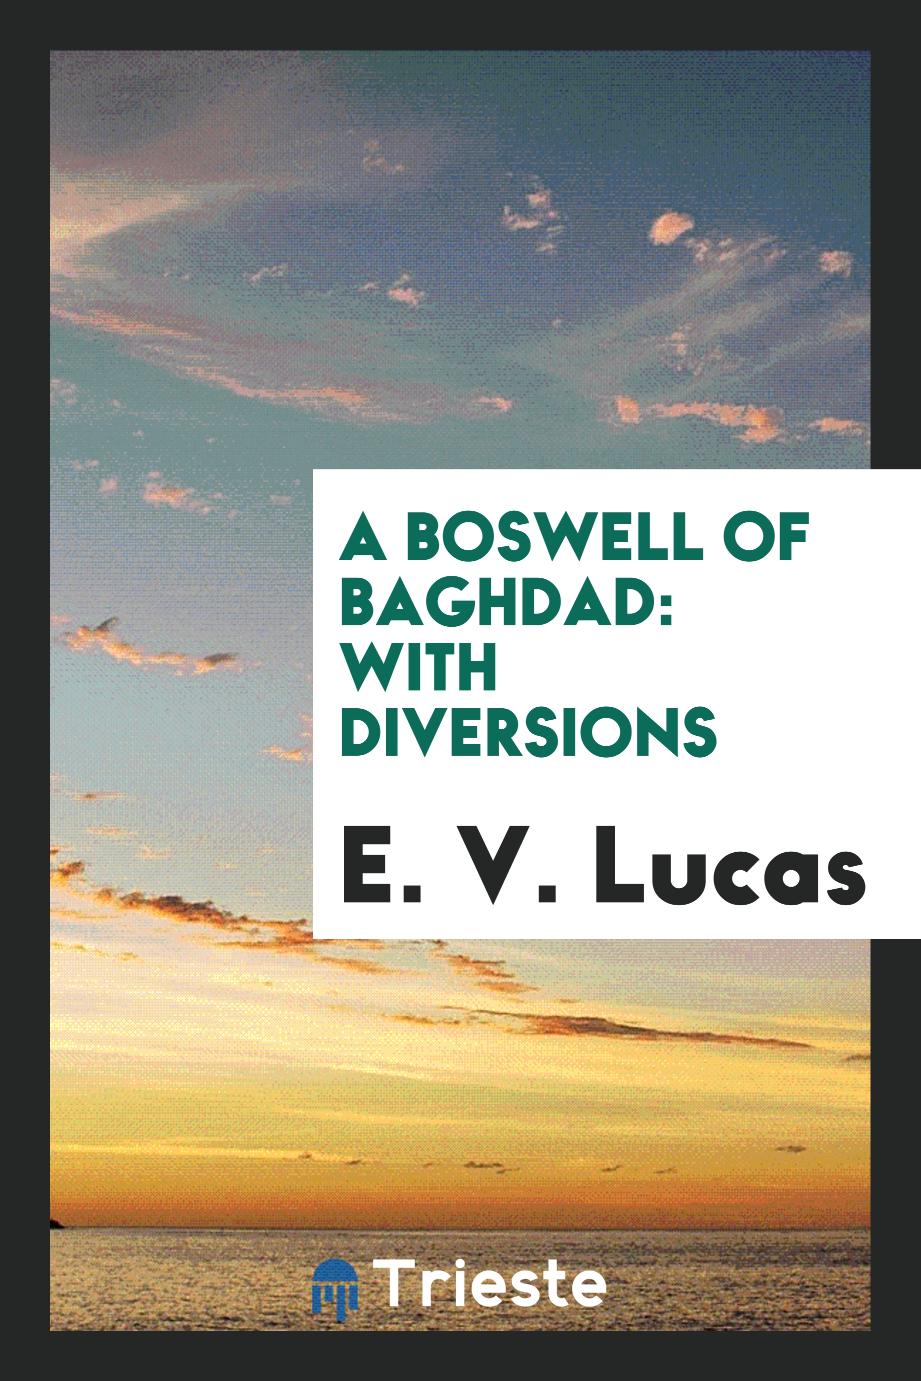 A Boswell of Baghdad: with diversions